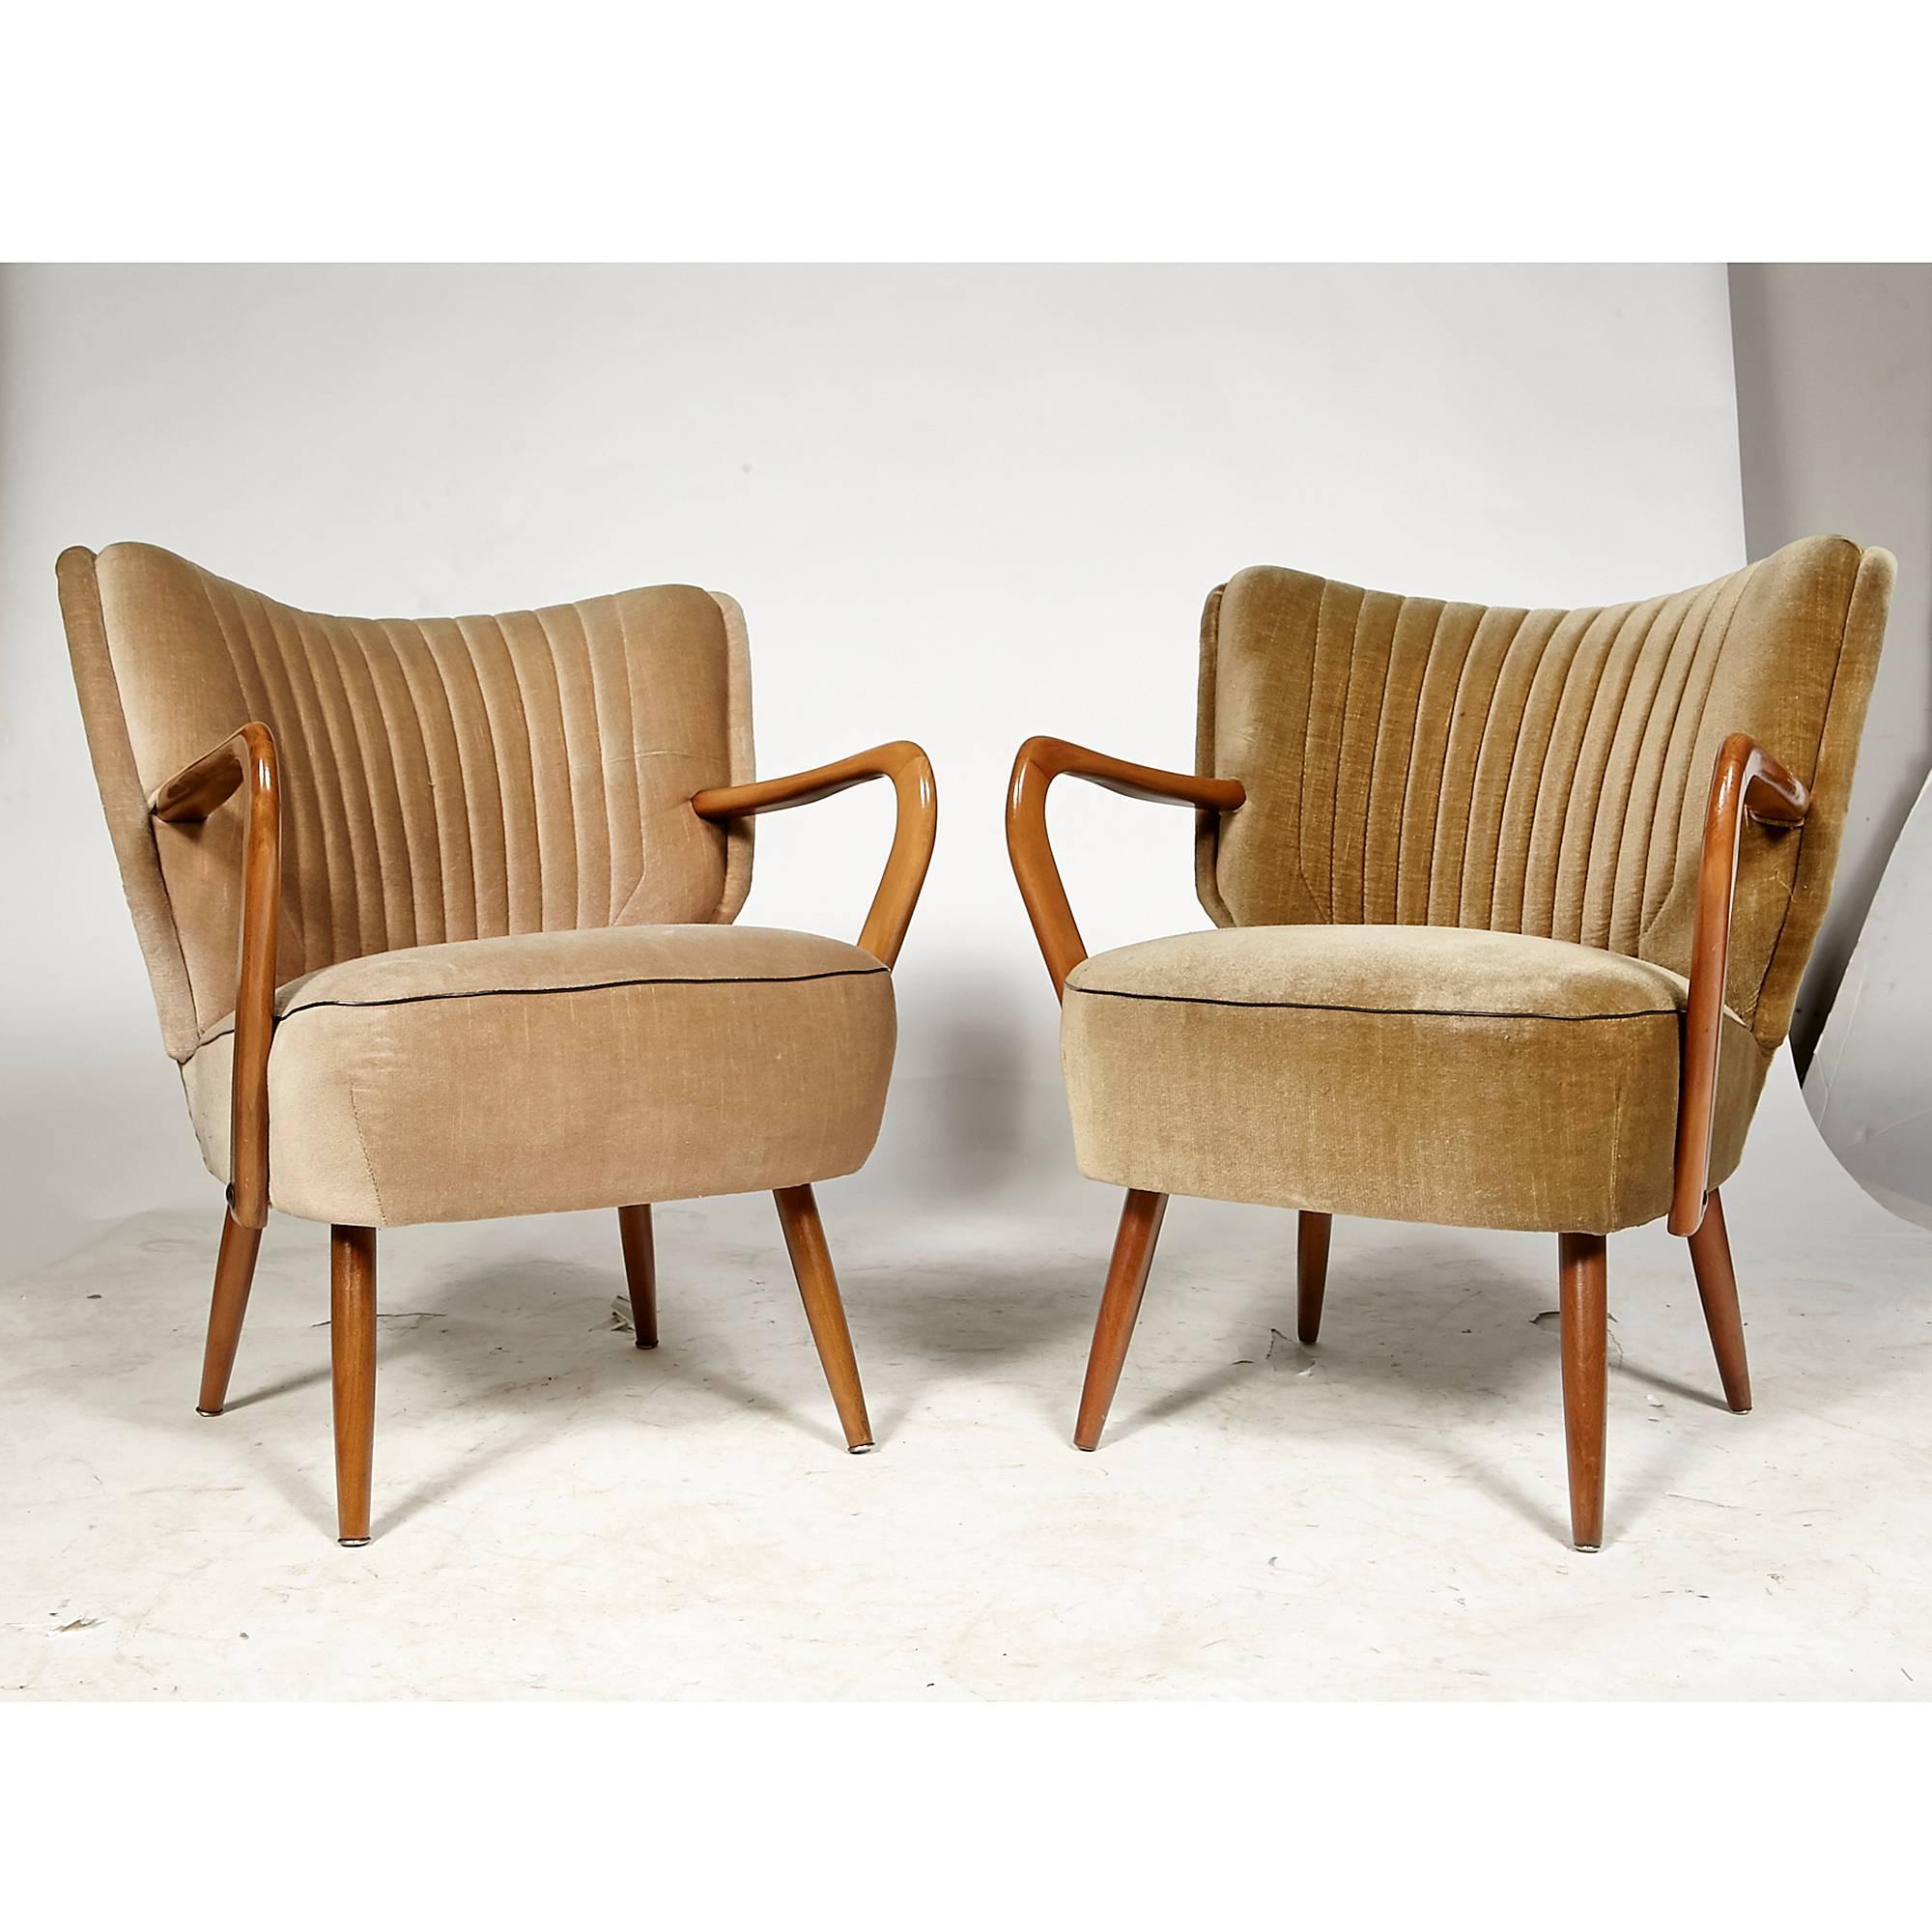 Vintage mid-20th century Swedish lounge chairs with channeled backs, circa 1950s. The fabric is in original condition. The chairs have curved arms and tapered legs. Arm height is 23in. 



 